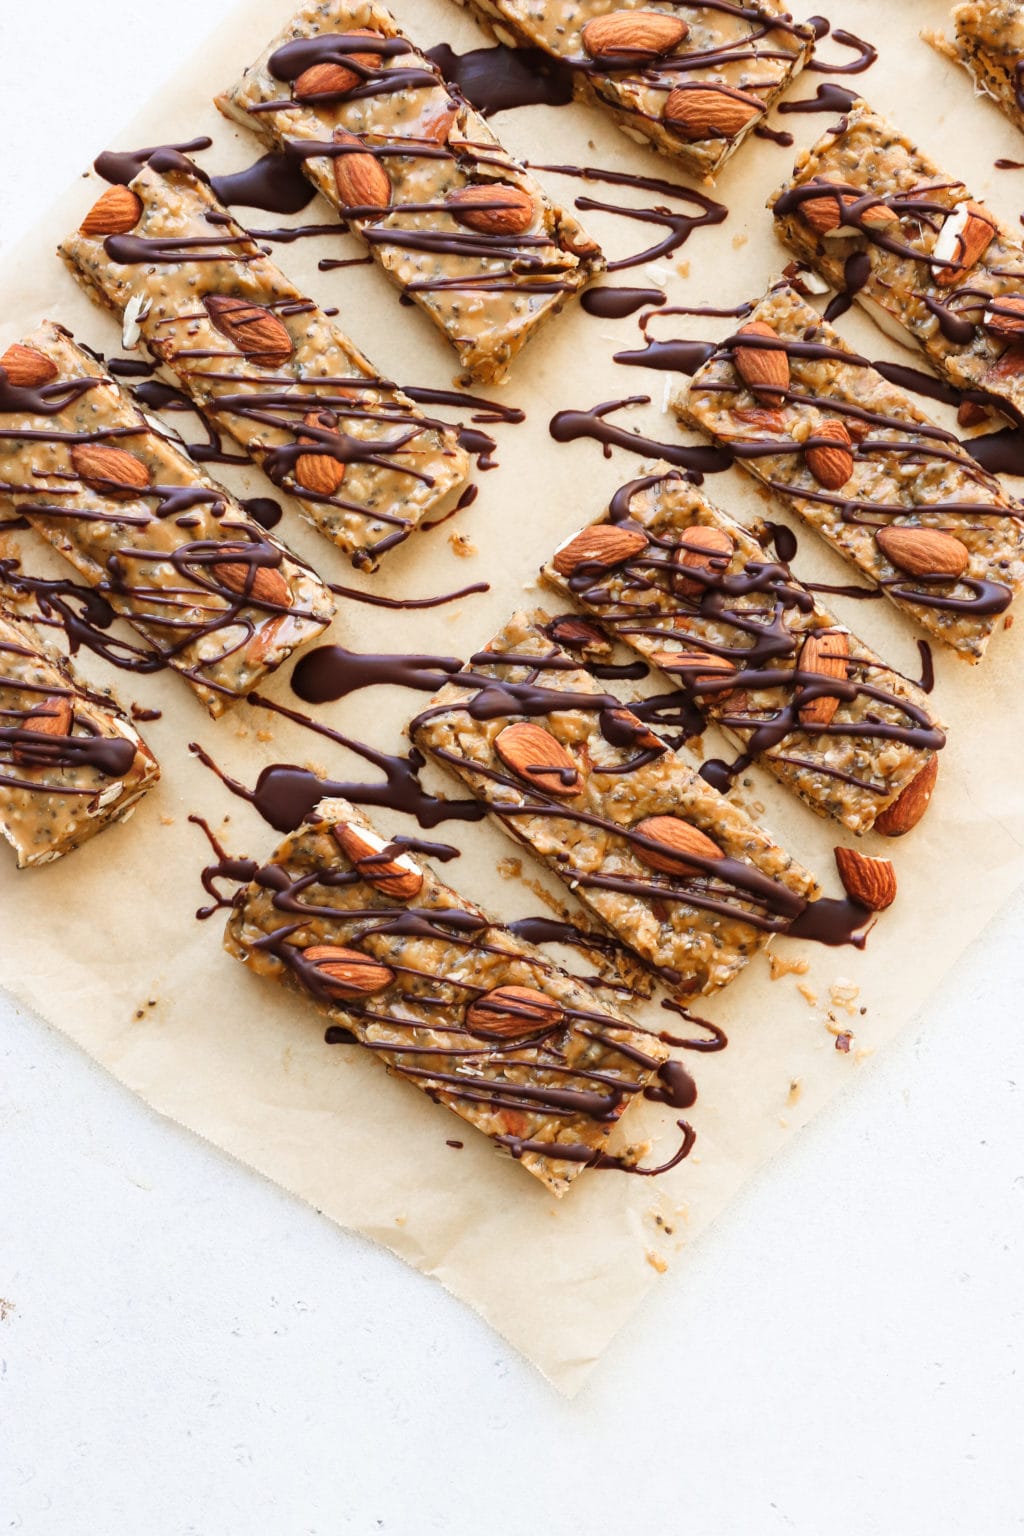 9 no-bake granola bars topped with almonds and chocolate drizzle are on a piece if parchment paper